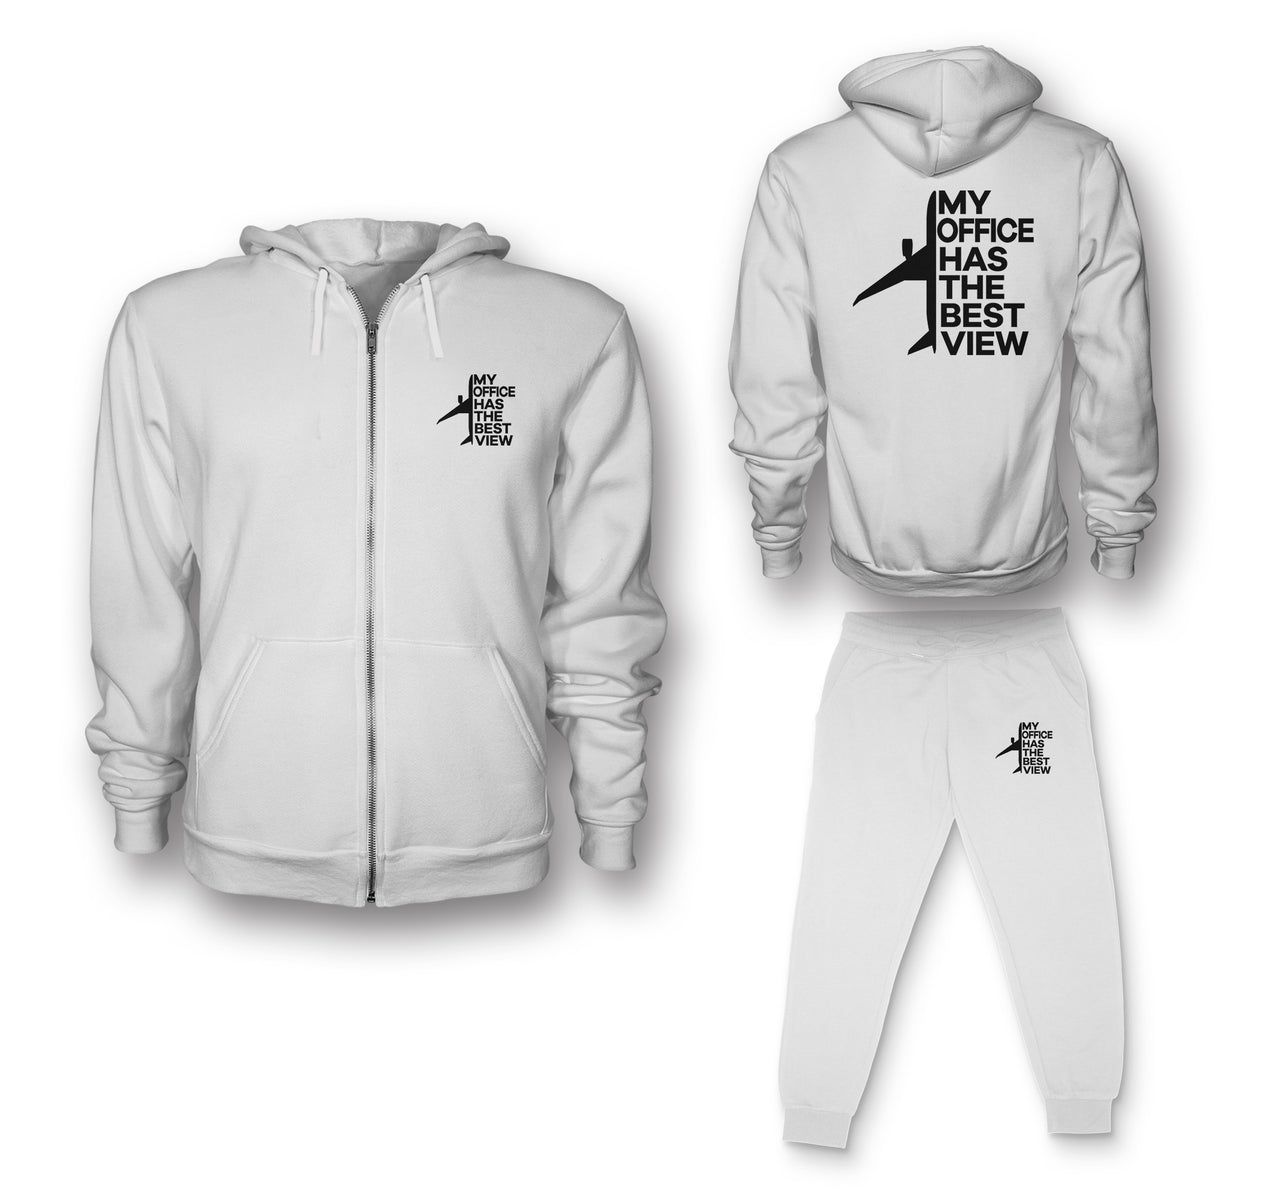 My Office Has The Best View Designed Zipped Hoodies & Sweatpants Set